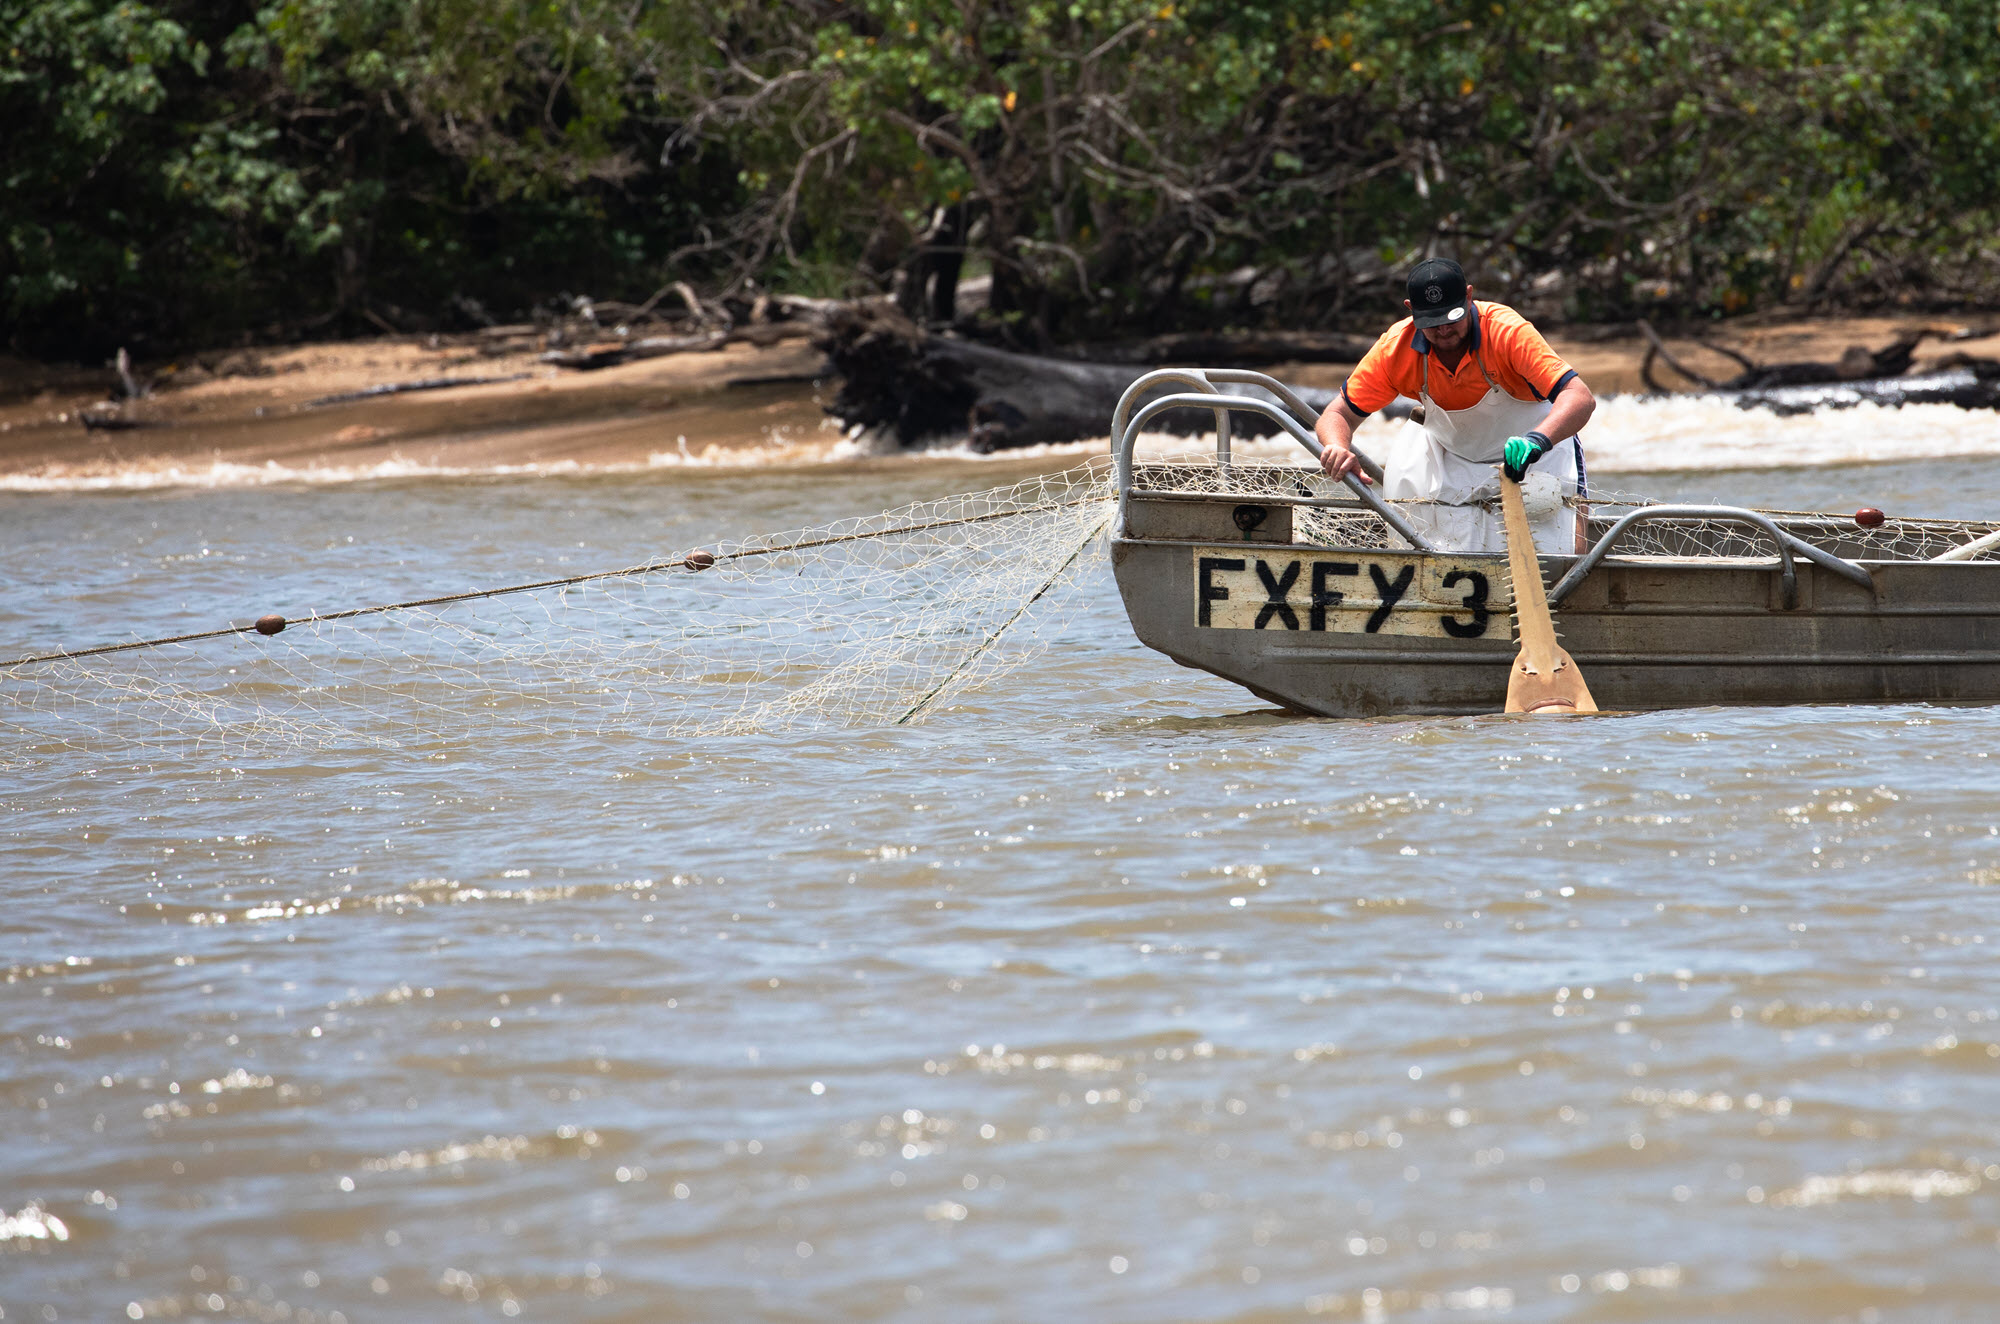 A commercial fisher in the Gulf of Carpentaria releasing a largetooth sawfish captured as bycatch in a gillnet